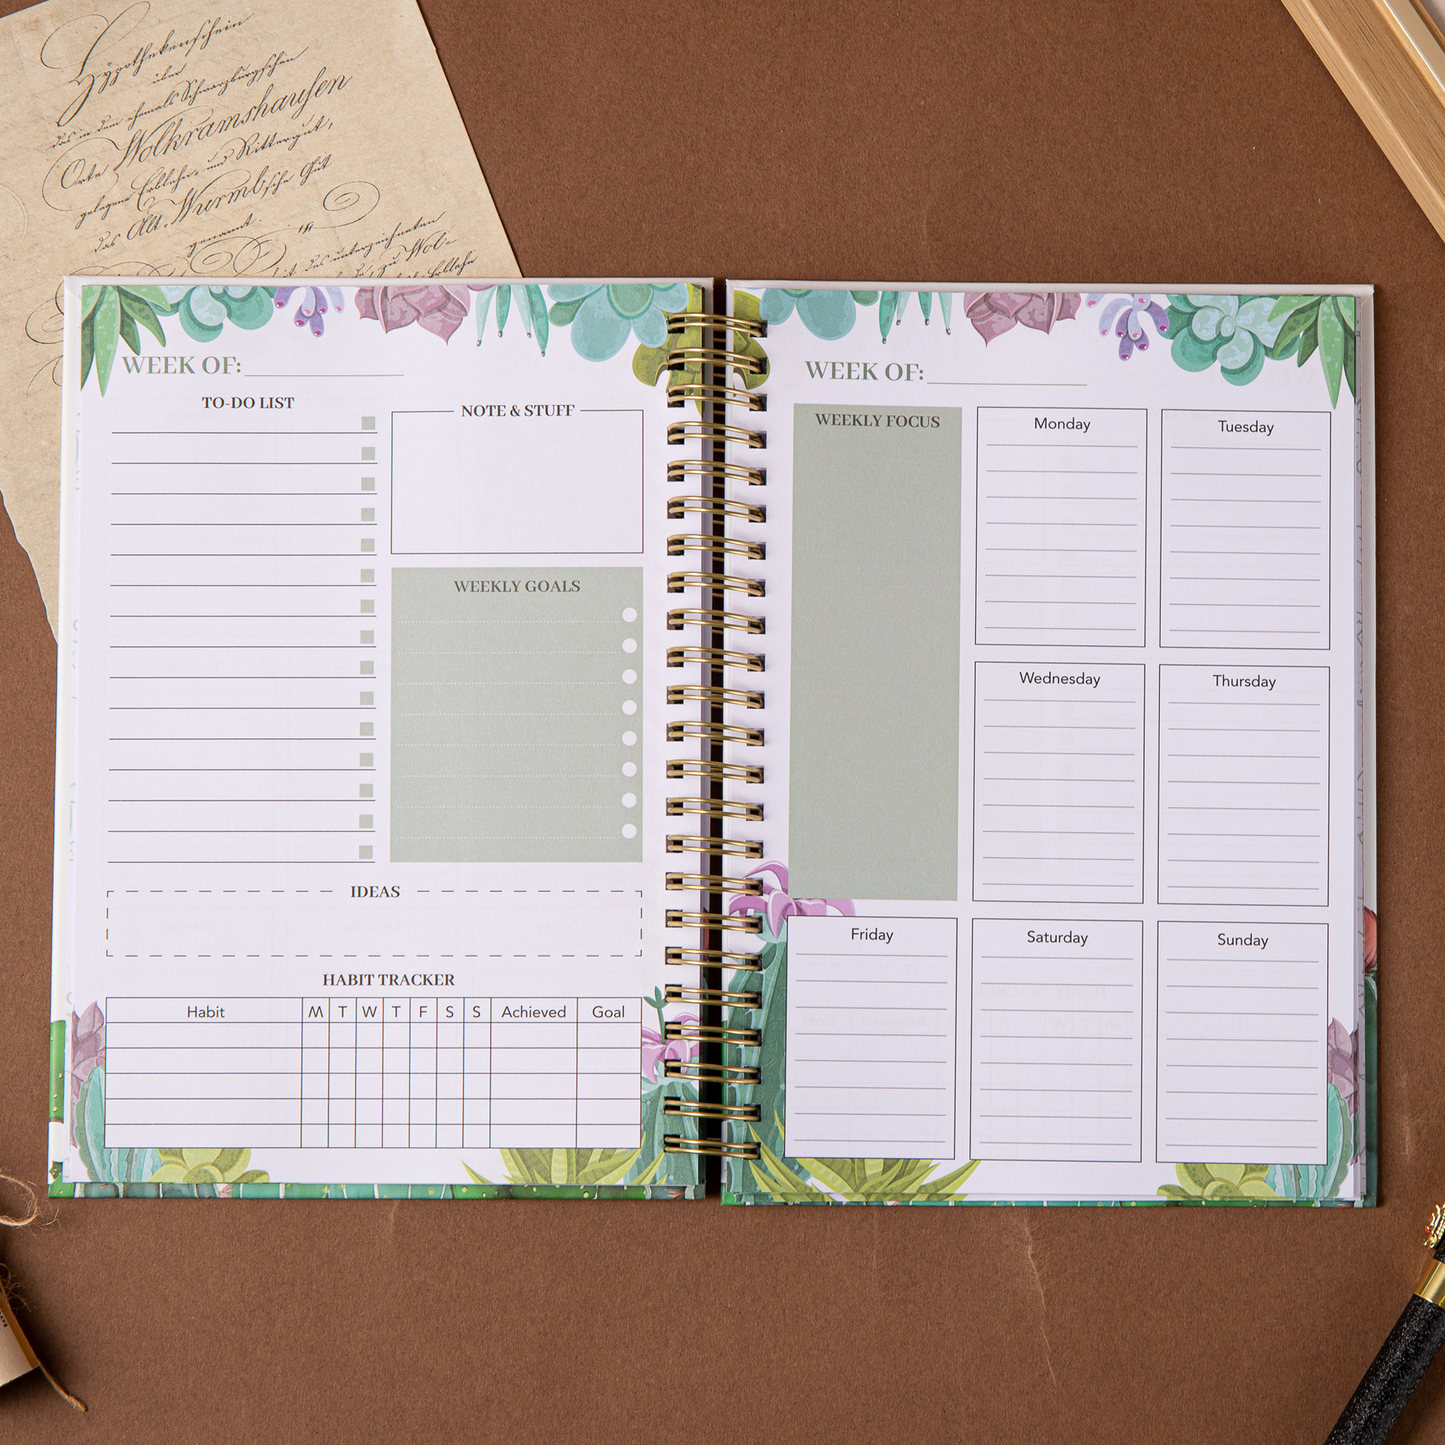 Cactus Weekly Planner - A5 - Green